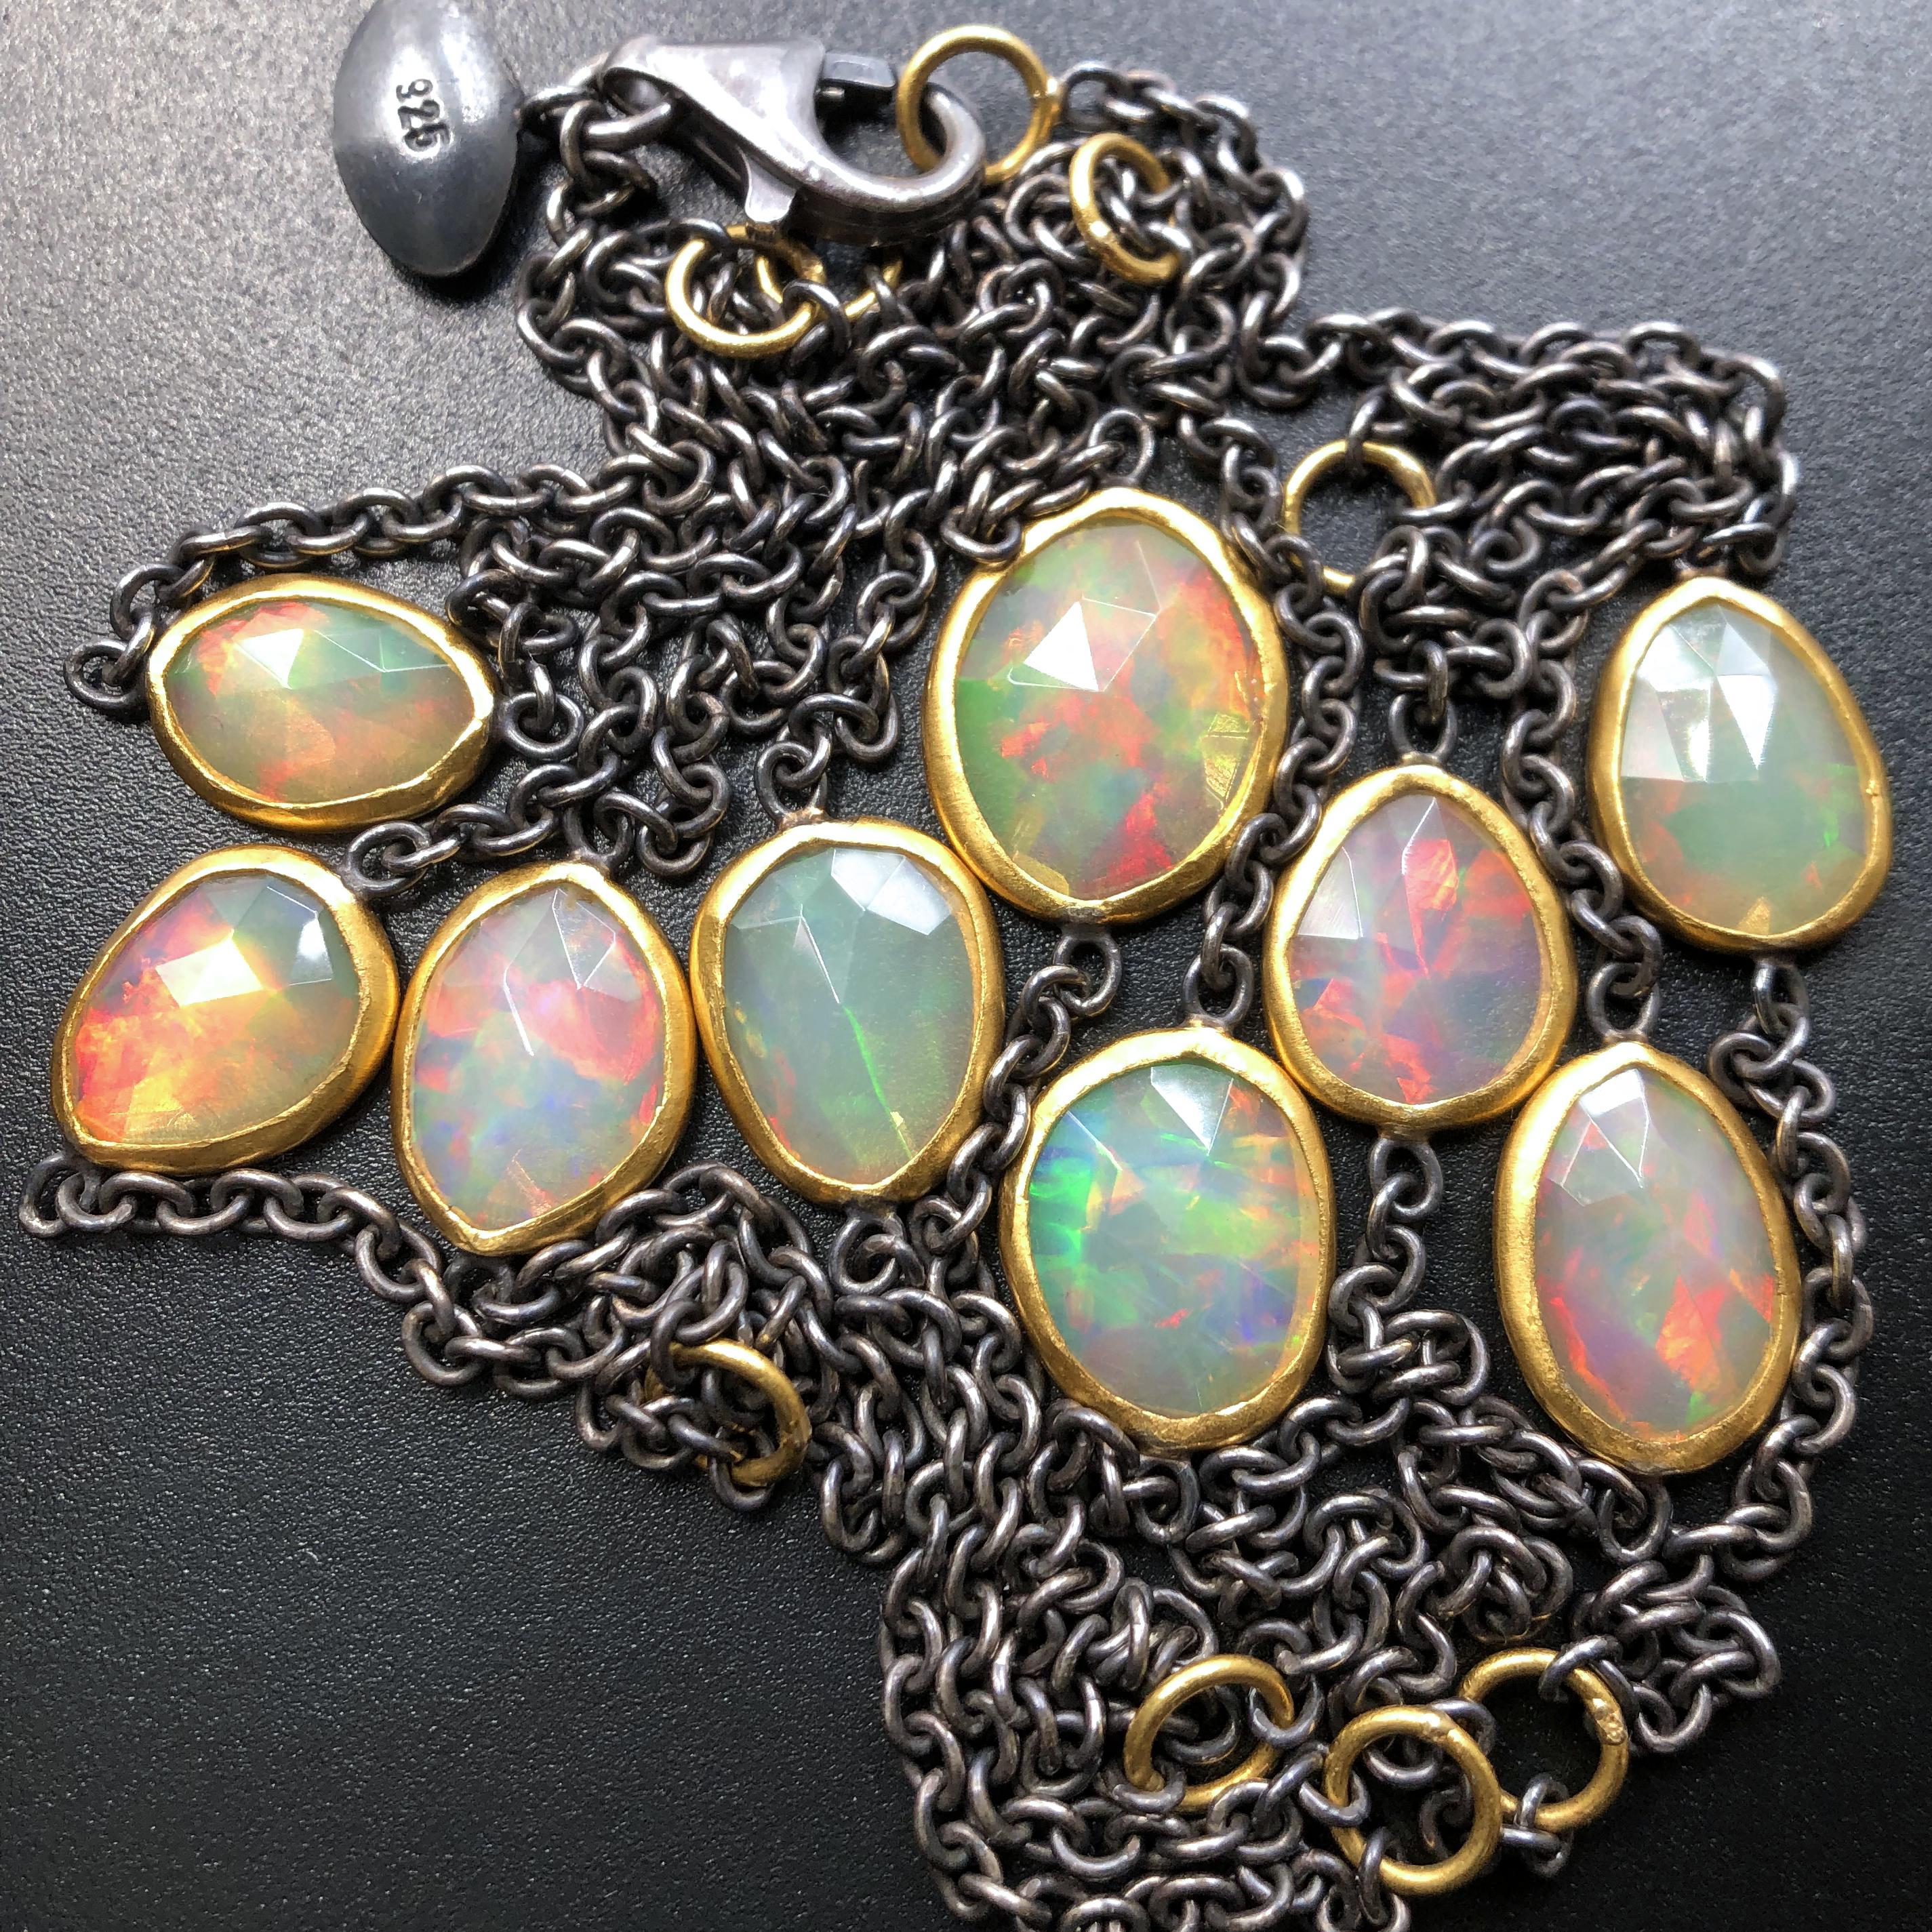 Long Necklace handcrafted by acclaimed jewelry artist Lika Behar featuring nine matched, faceted Ethiopian opals (12.74 total carats) with spectacular color and fire, individually bezel-set in 24k gold and attached to an oxidized sterling silver